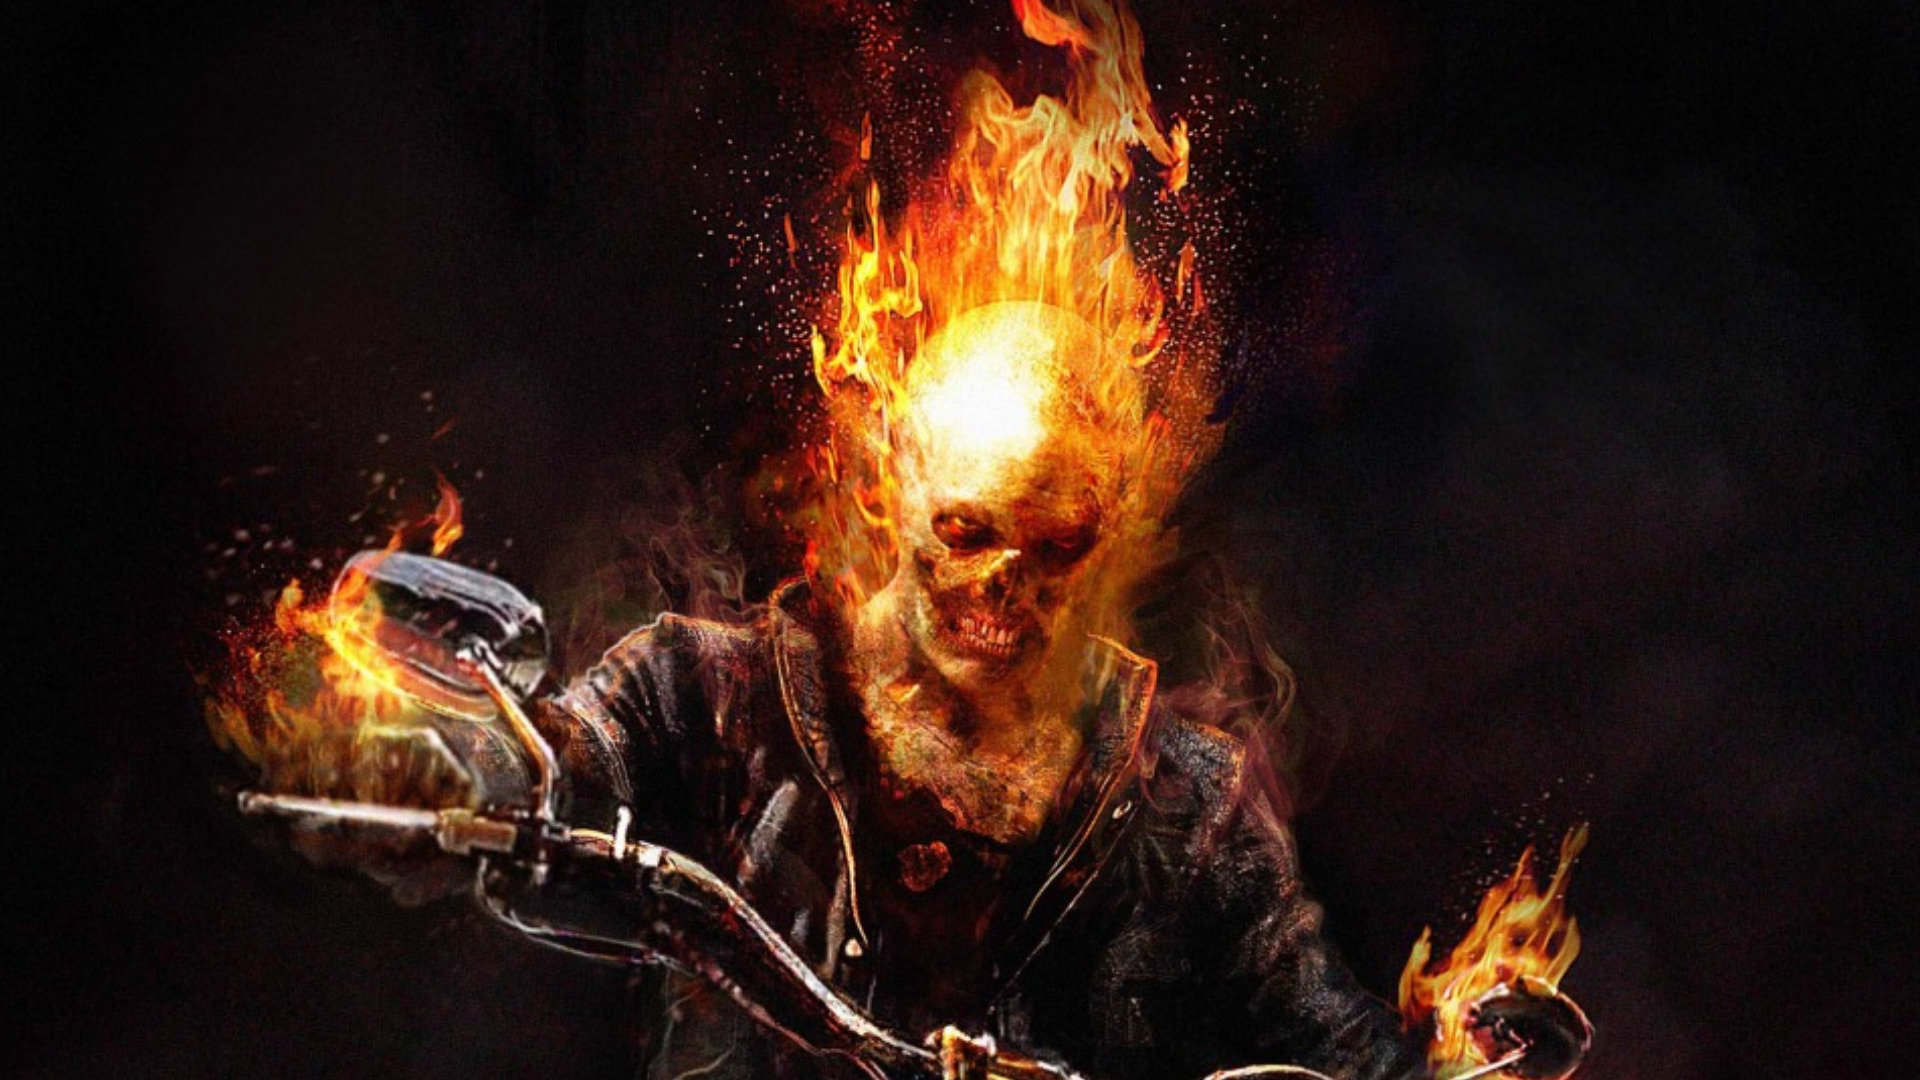 Ghost Rider Wallpapers 1920x1080 Full Hd 1080p Desktop Backgrounds